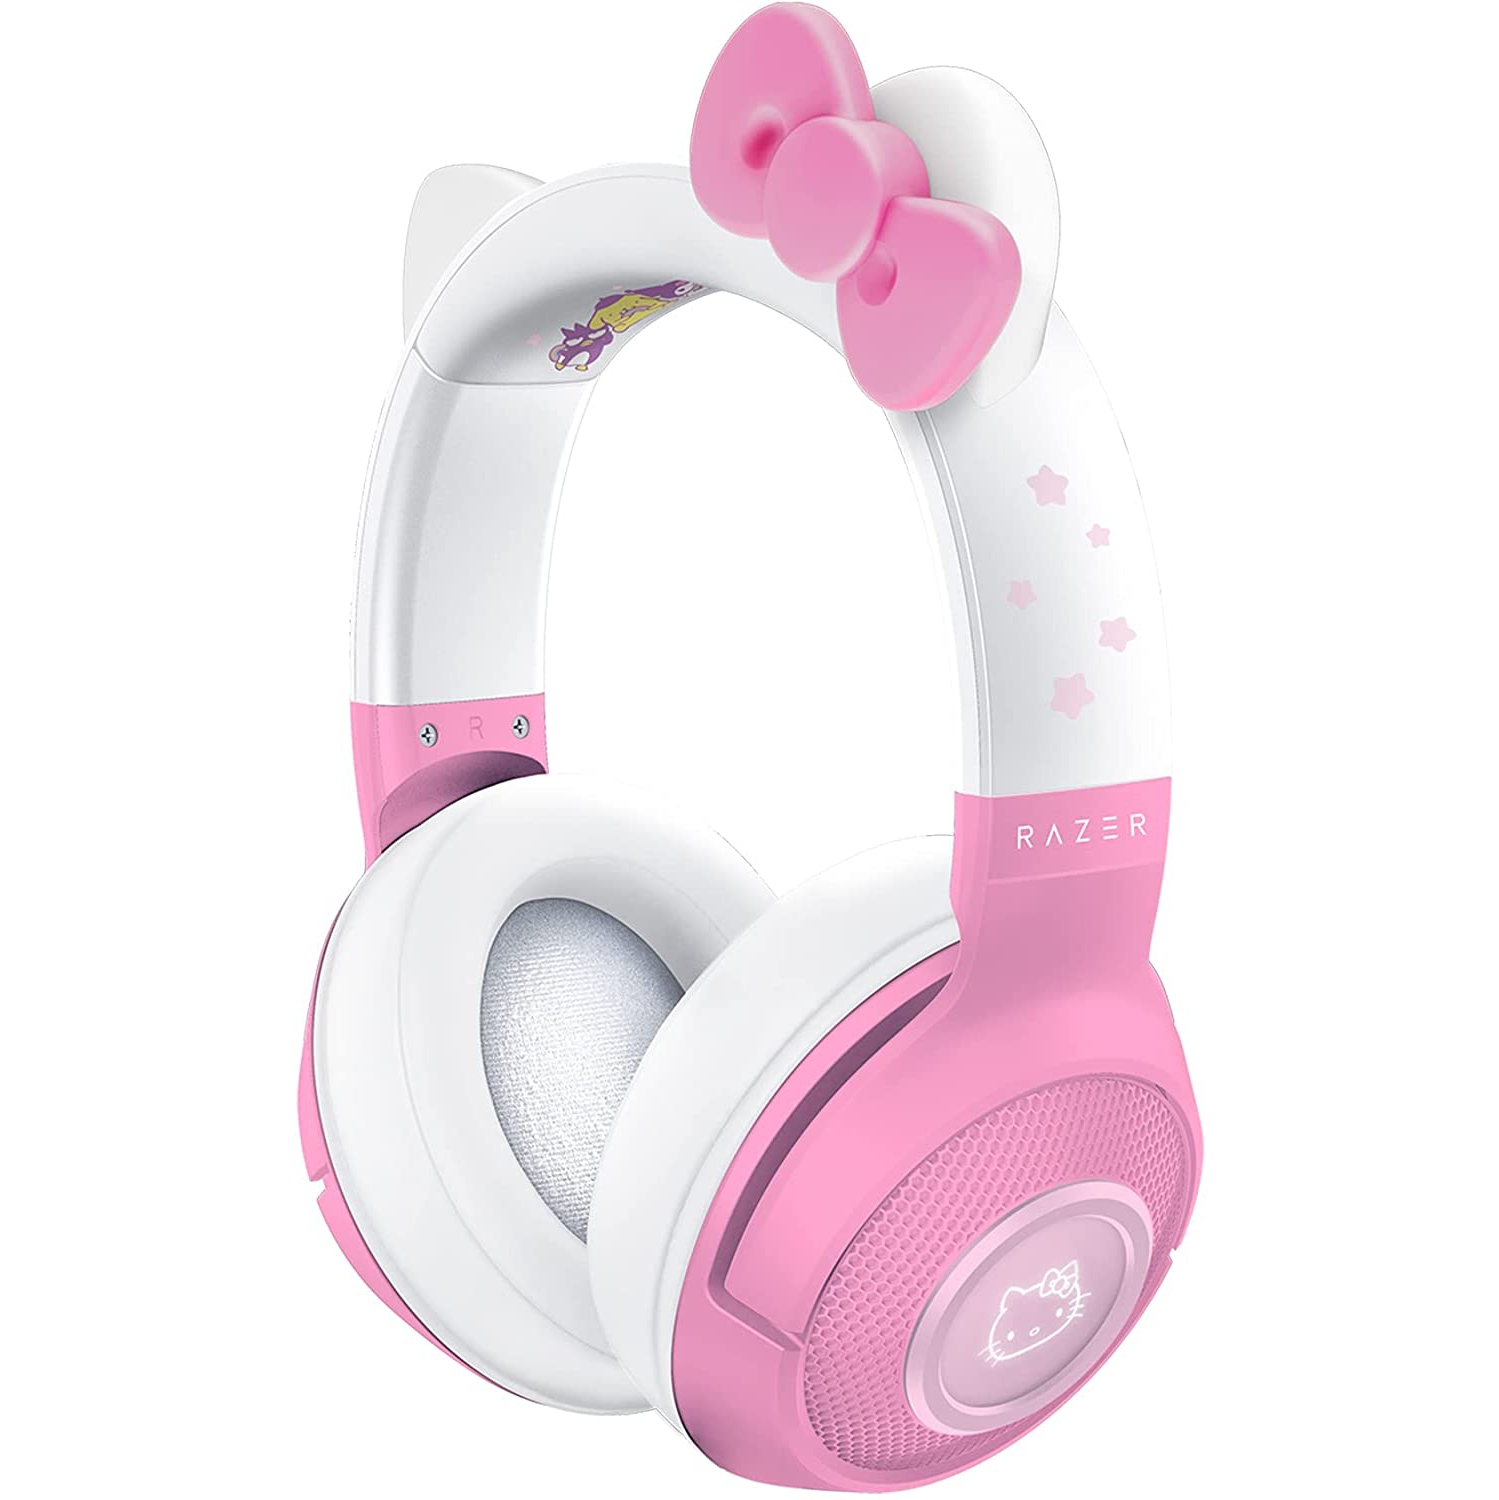 Dolaer Kraken BT Headset: Bluetooth 5.0-40ms Low Latency Connection - Custom-Tuned 40mm Drivers - Beamforming Microphone - Powered by Chroma - Hello Kitty & Friends Edition